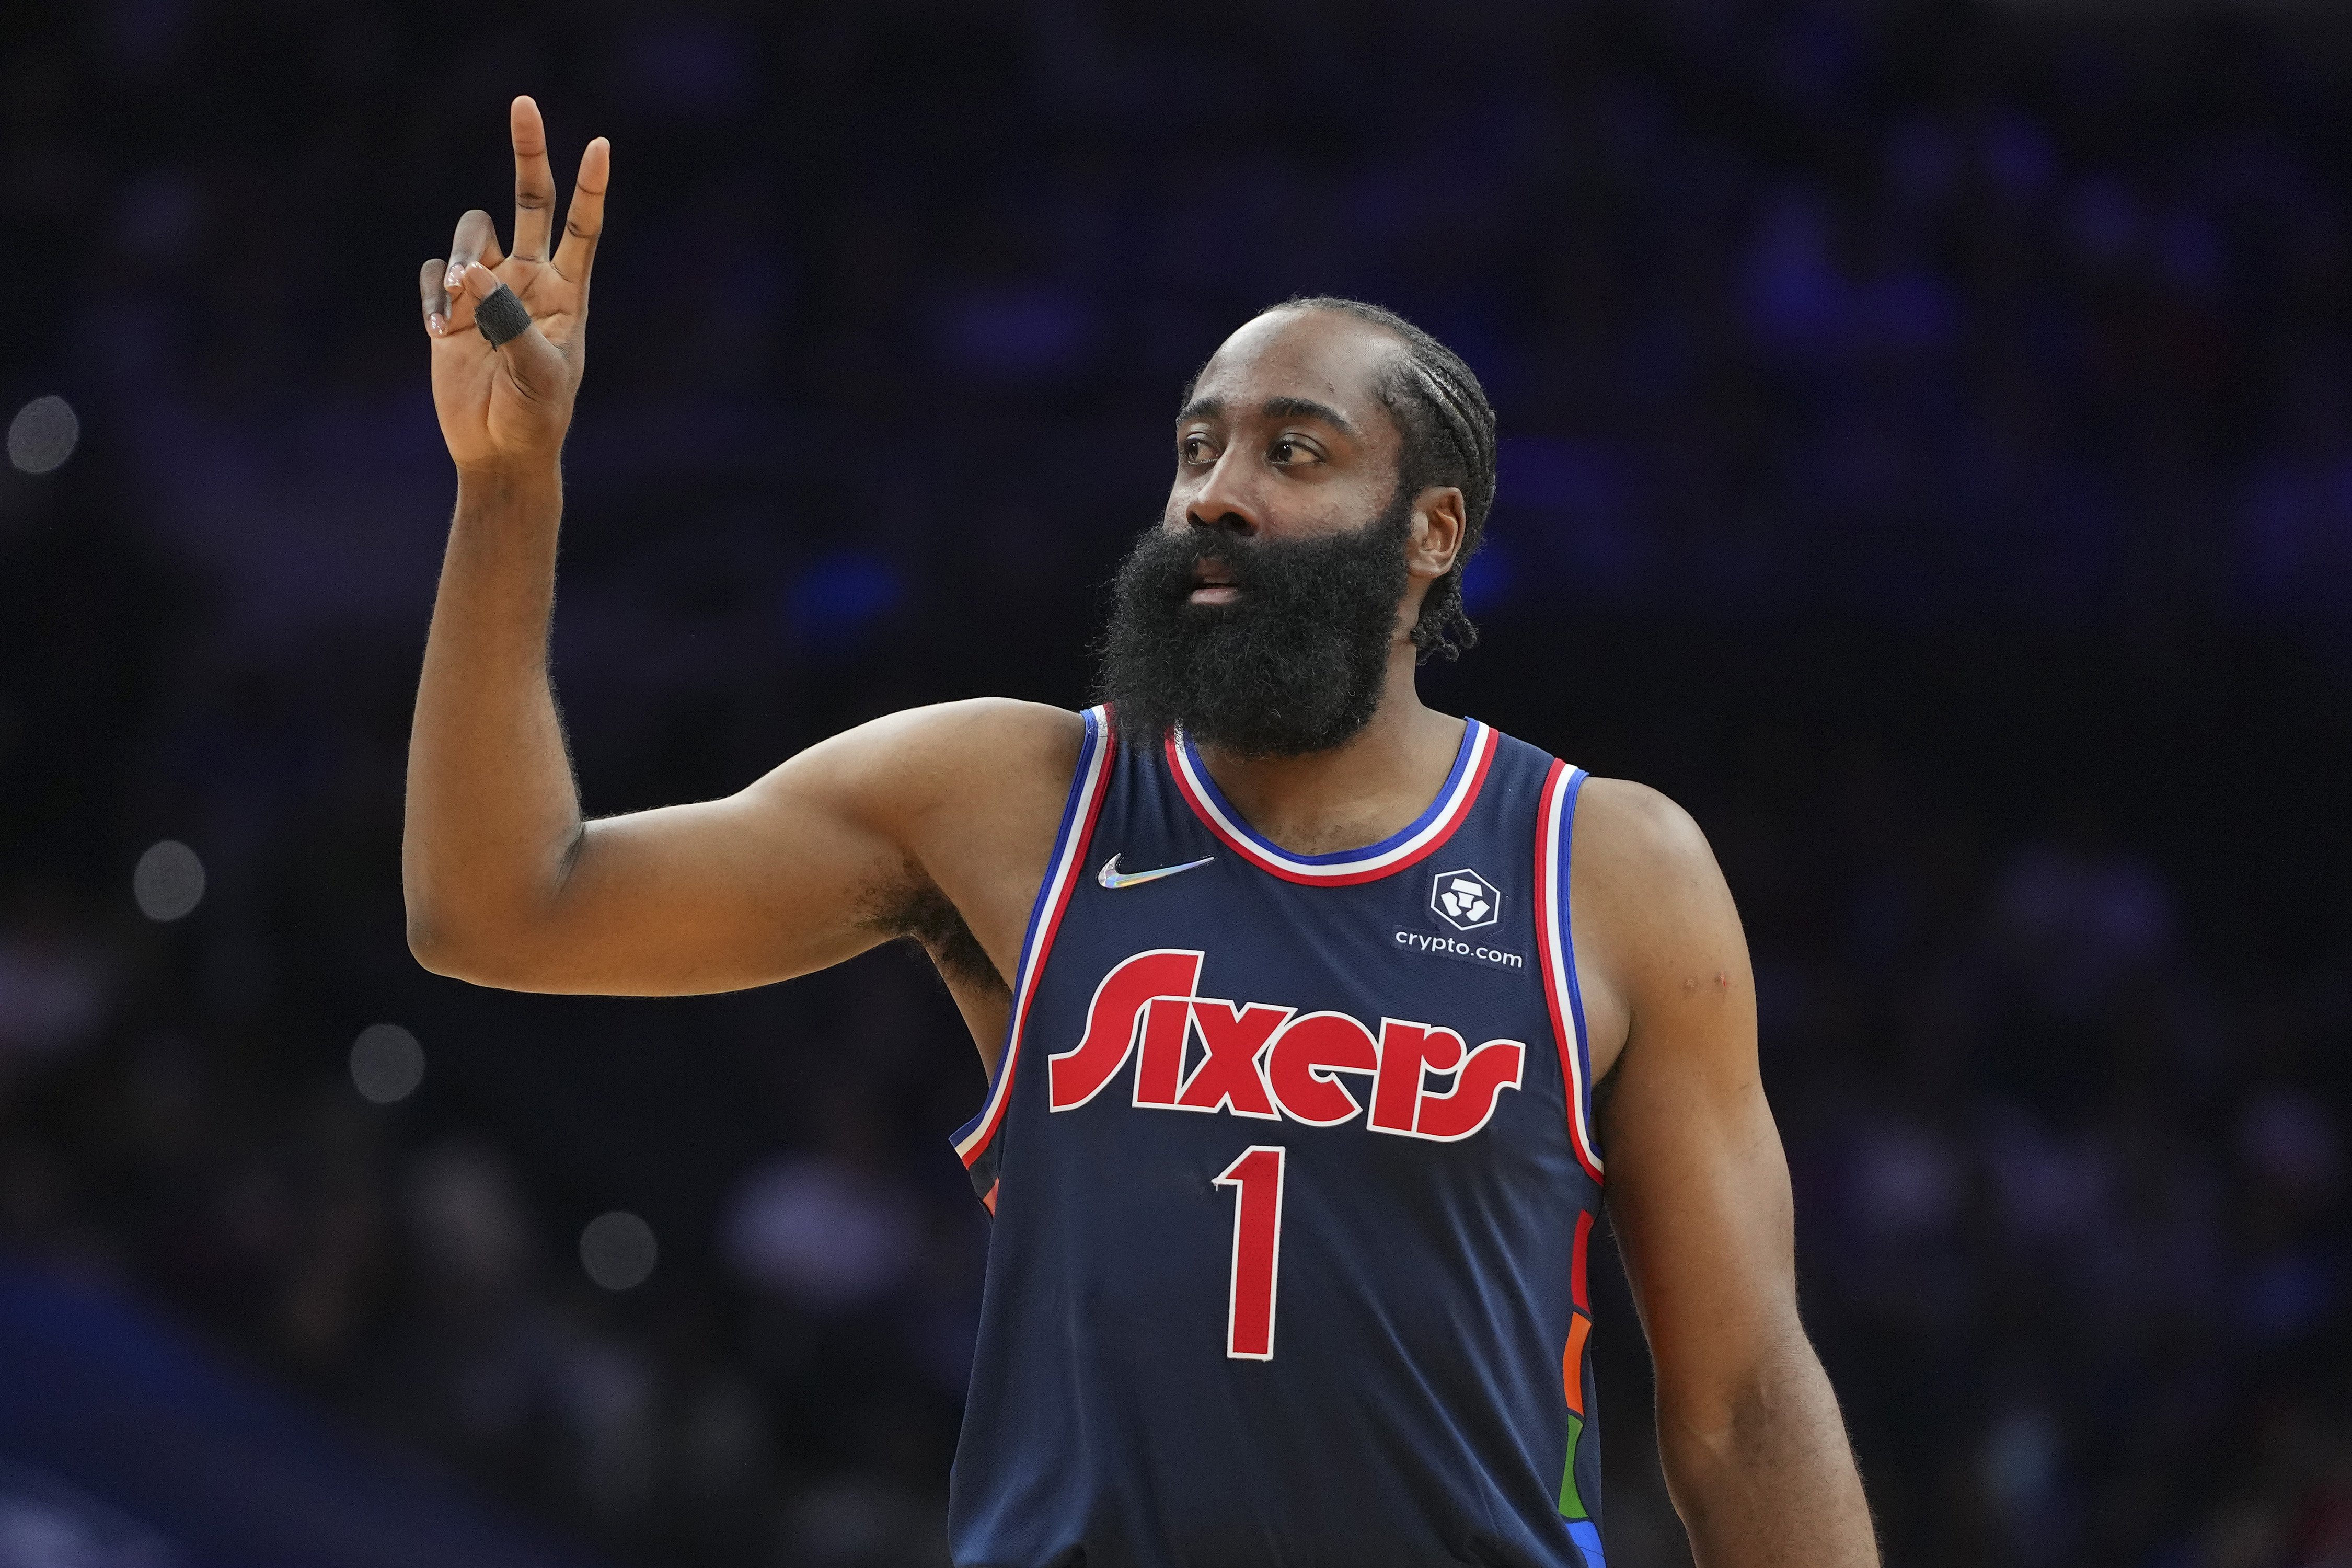 James Harden in a game against the Dallas Mavericks at the Wells Fargo Center in Philadelphia, Pennsylvania, on March 18, 2022. | Source: Getty Images